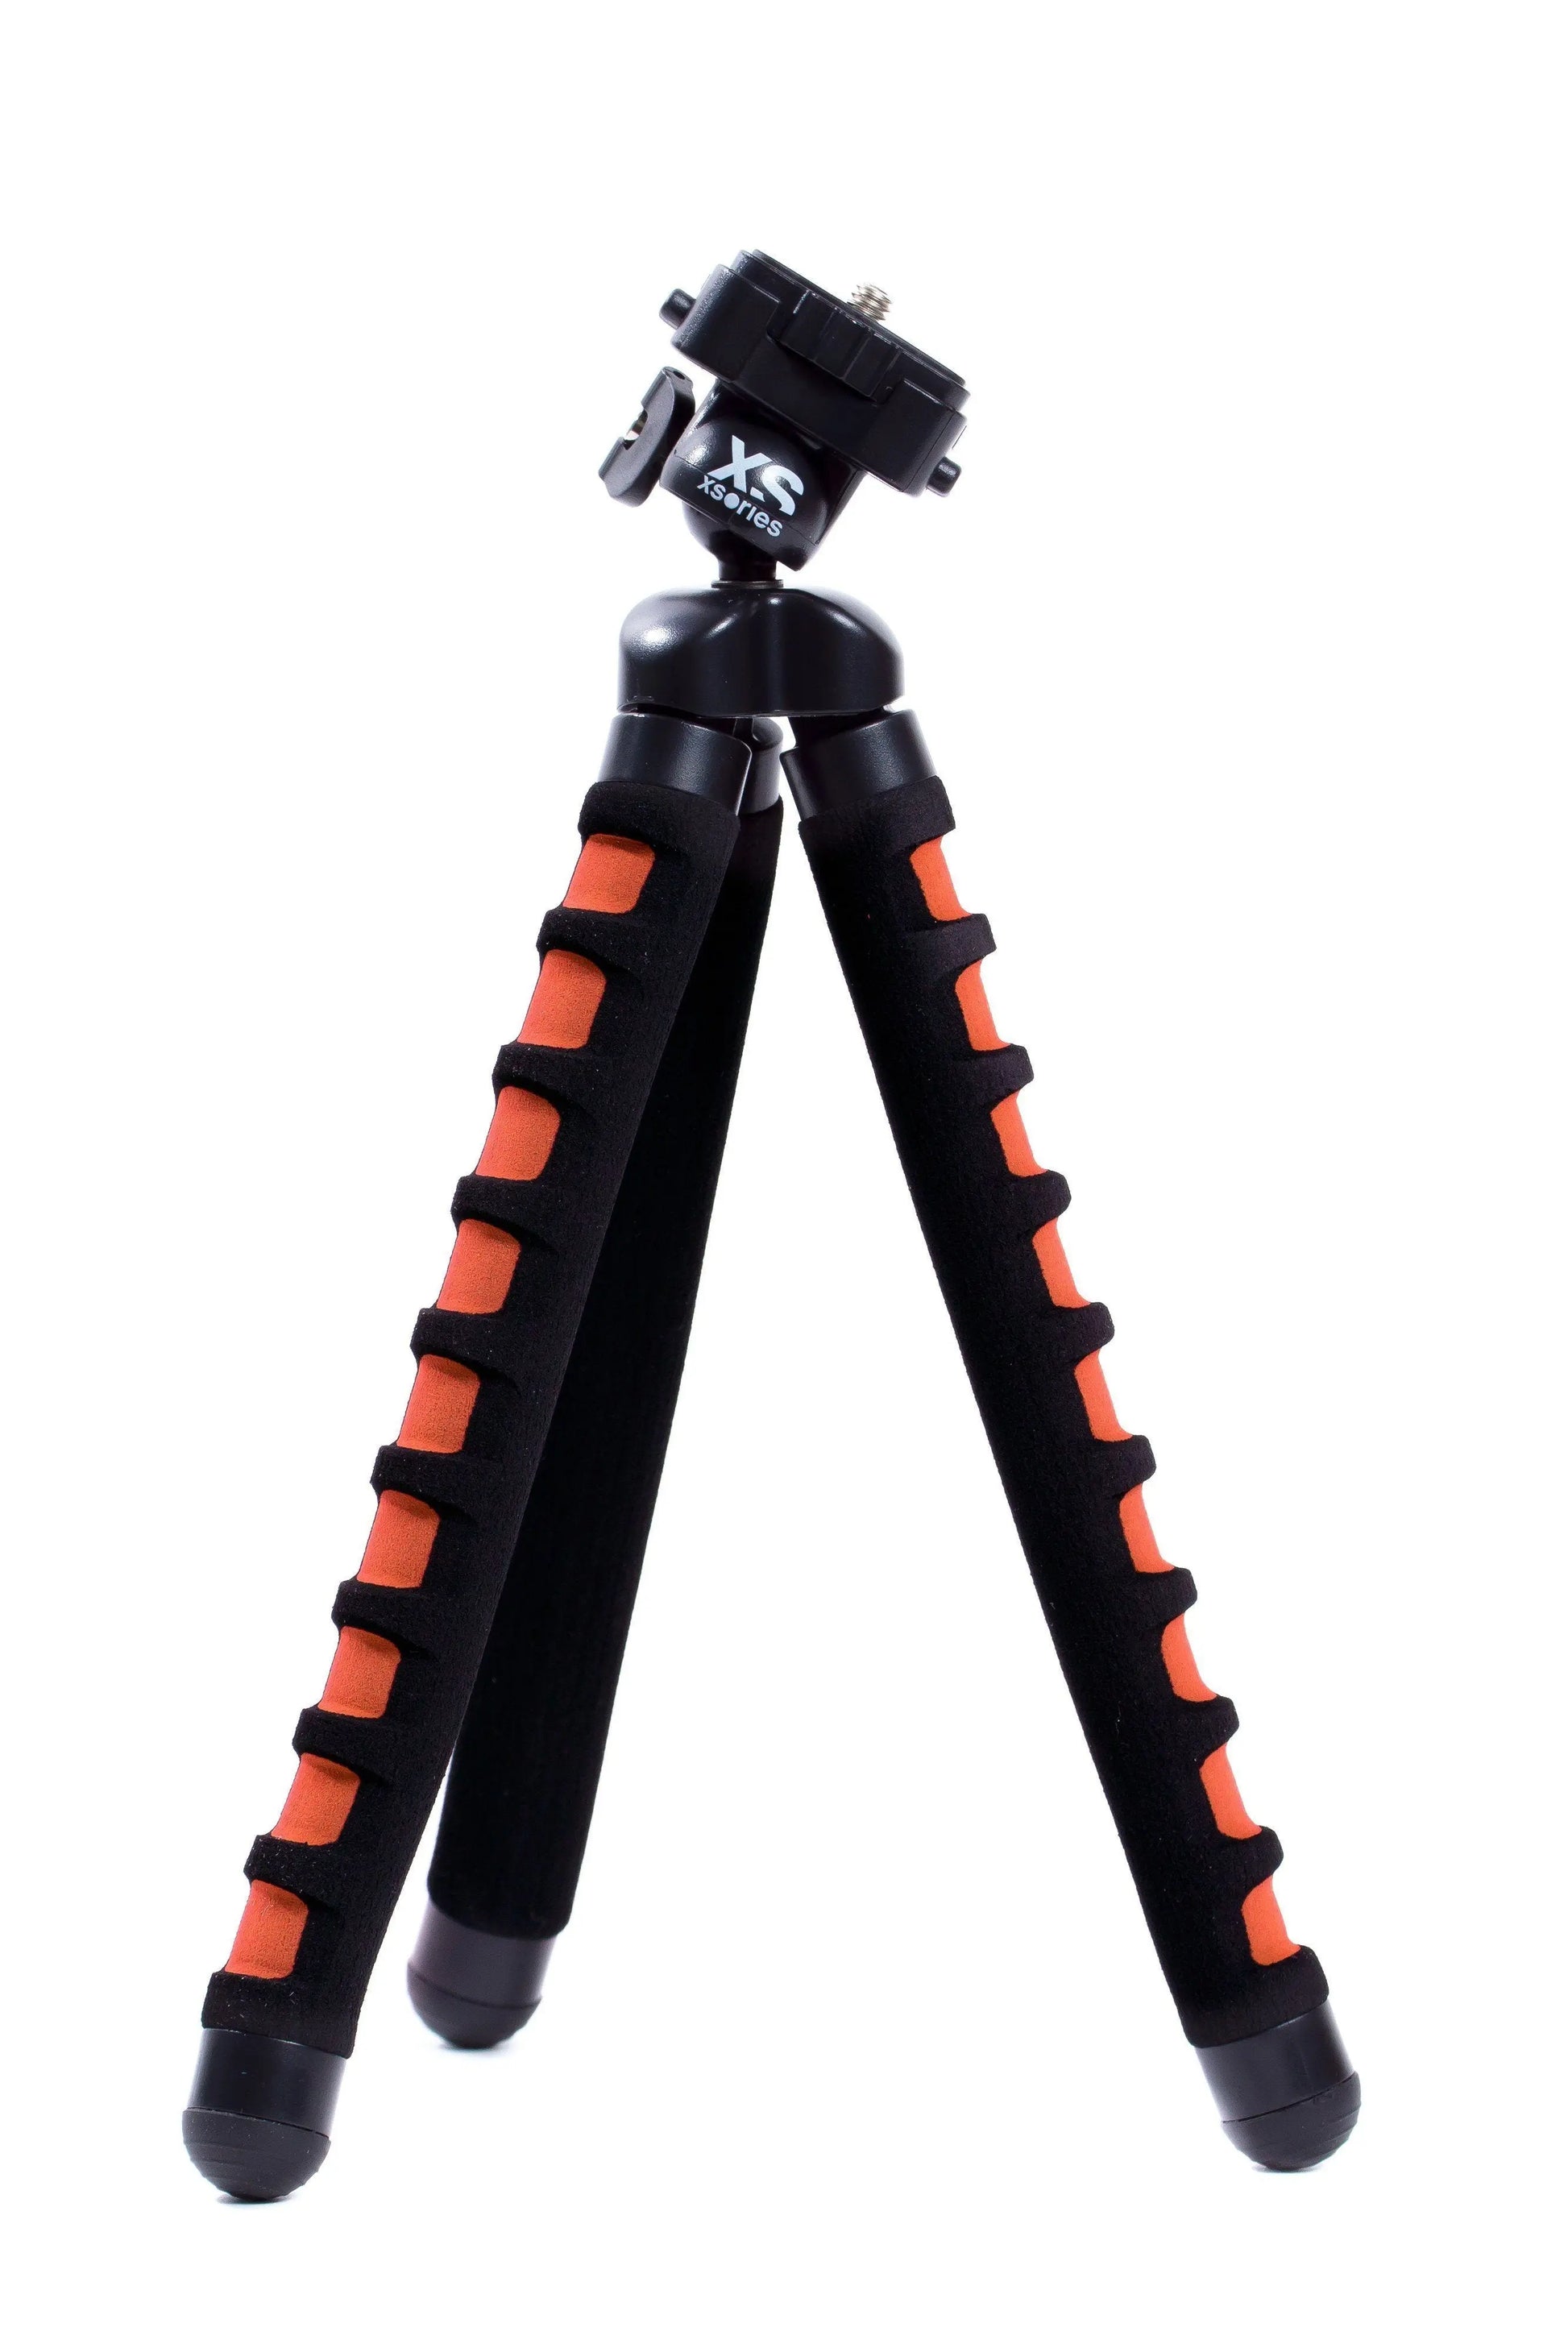 Camera Accessories - X-Sories Big Bendy Tripod With Ball Head (Colors Available In Black-Orange, Grey & Red)